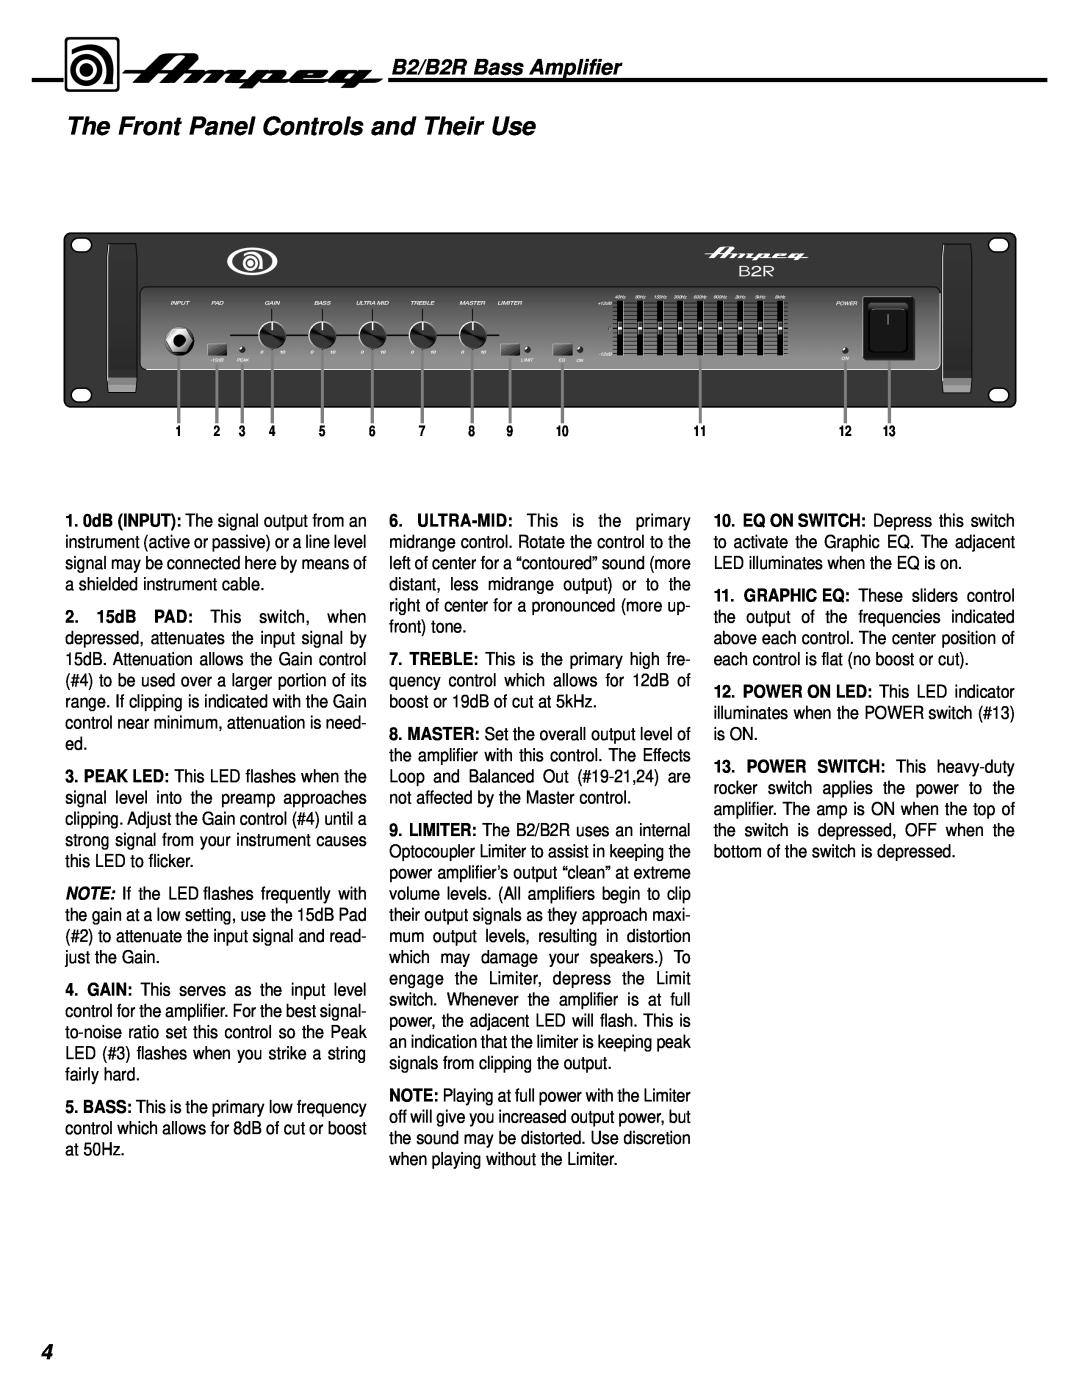 Ampeg manual The Front Panel Controls and Their Use, B2/B2R Bass Amplifier 